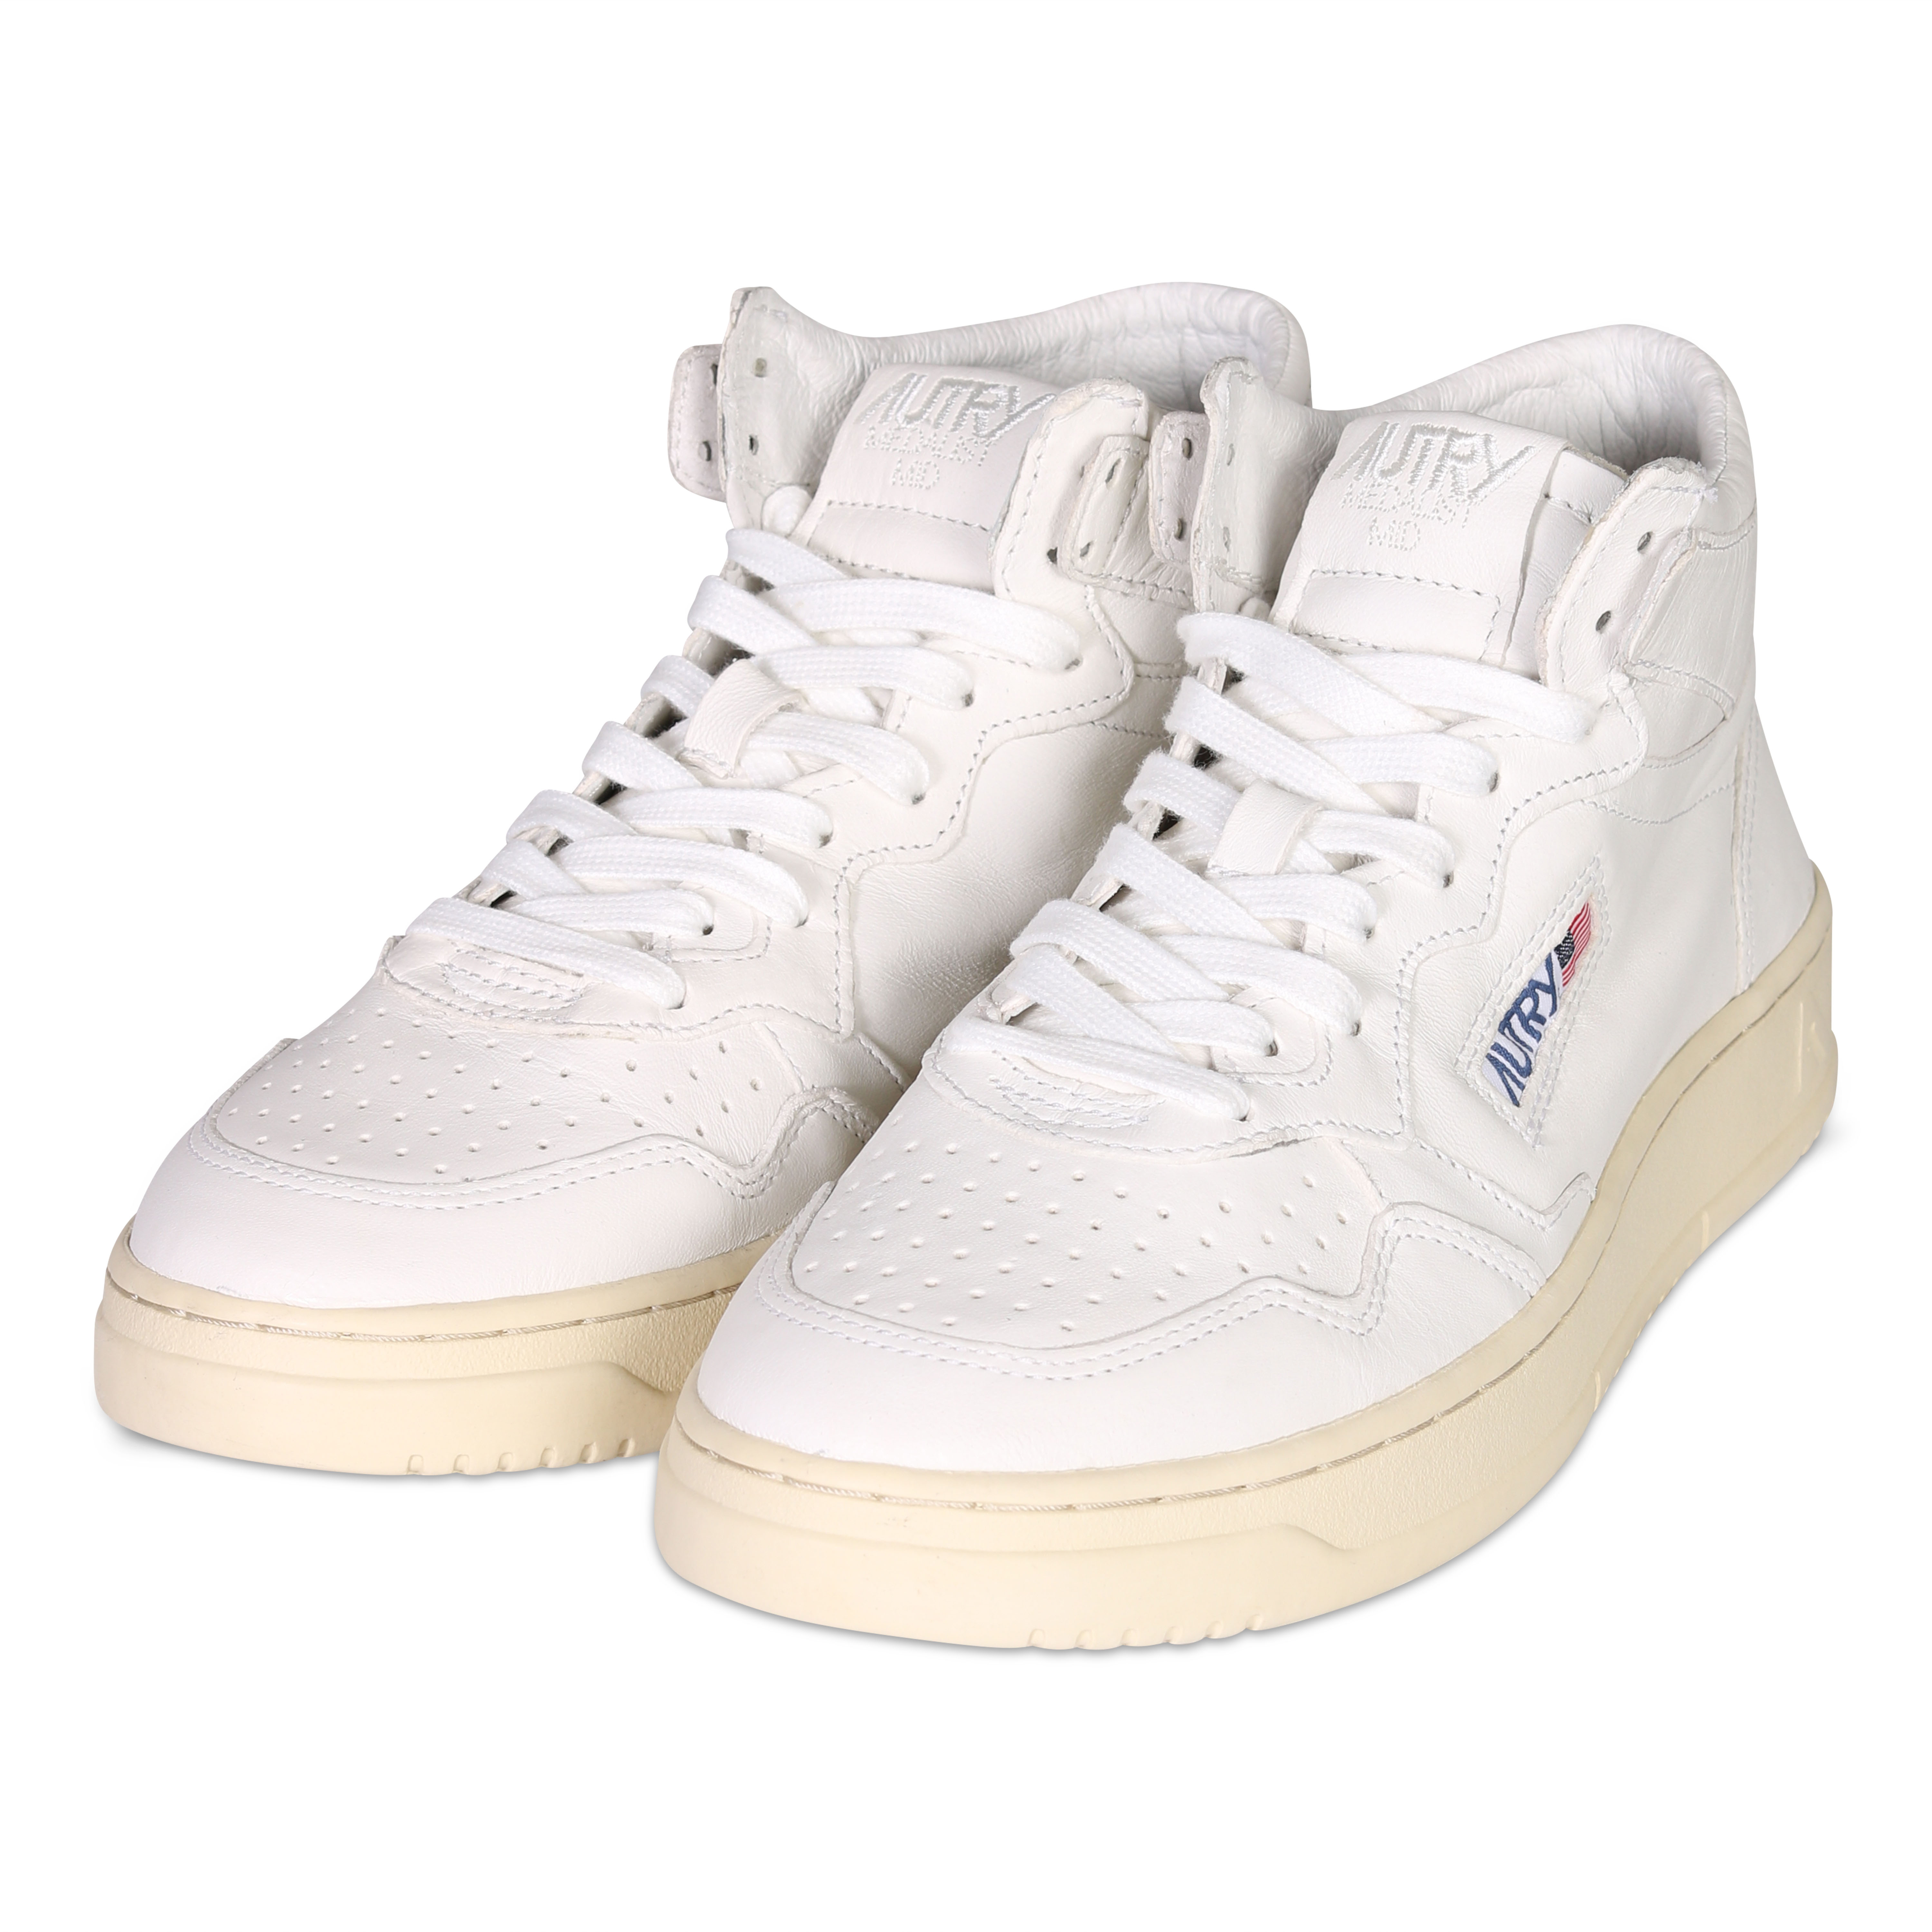 Autry Action Shoes Medalist Mid Sneaker Goat White